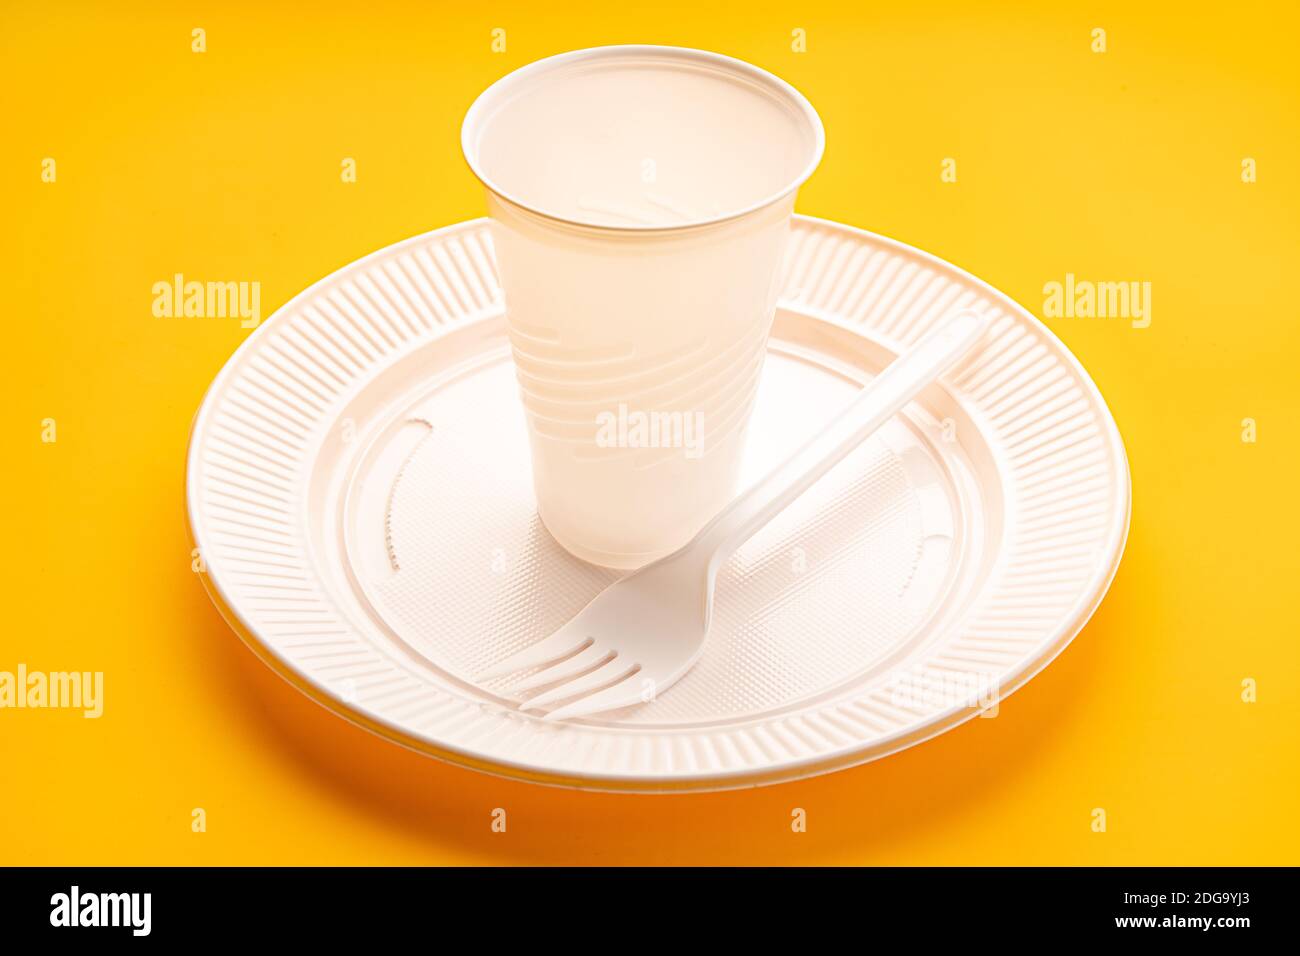 Plastic dishware. White vase, plate and fork on yellow background. Disposable plastic waste Stock Photo